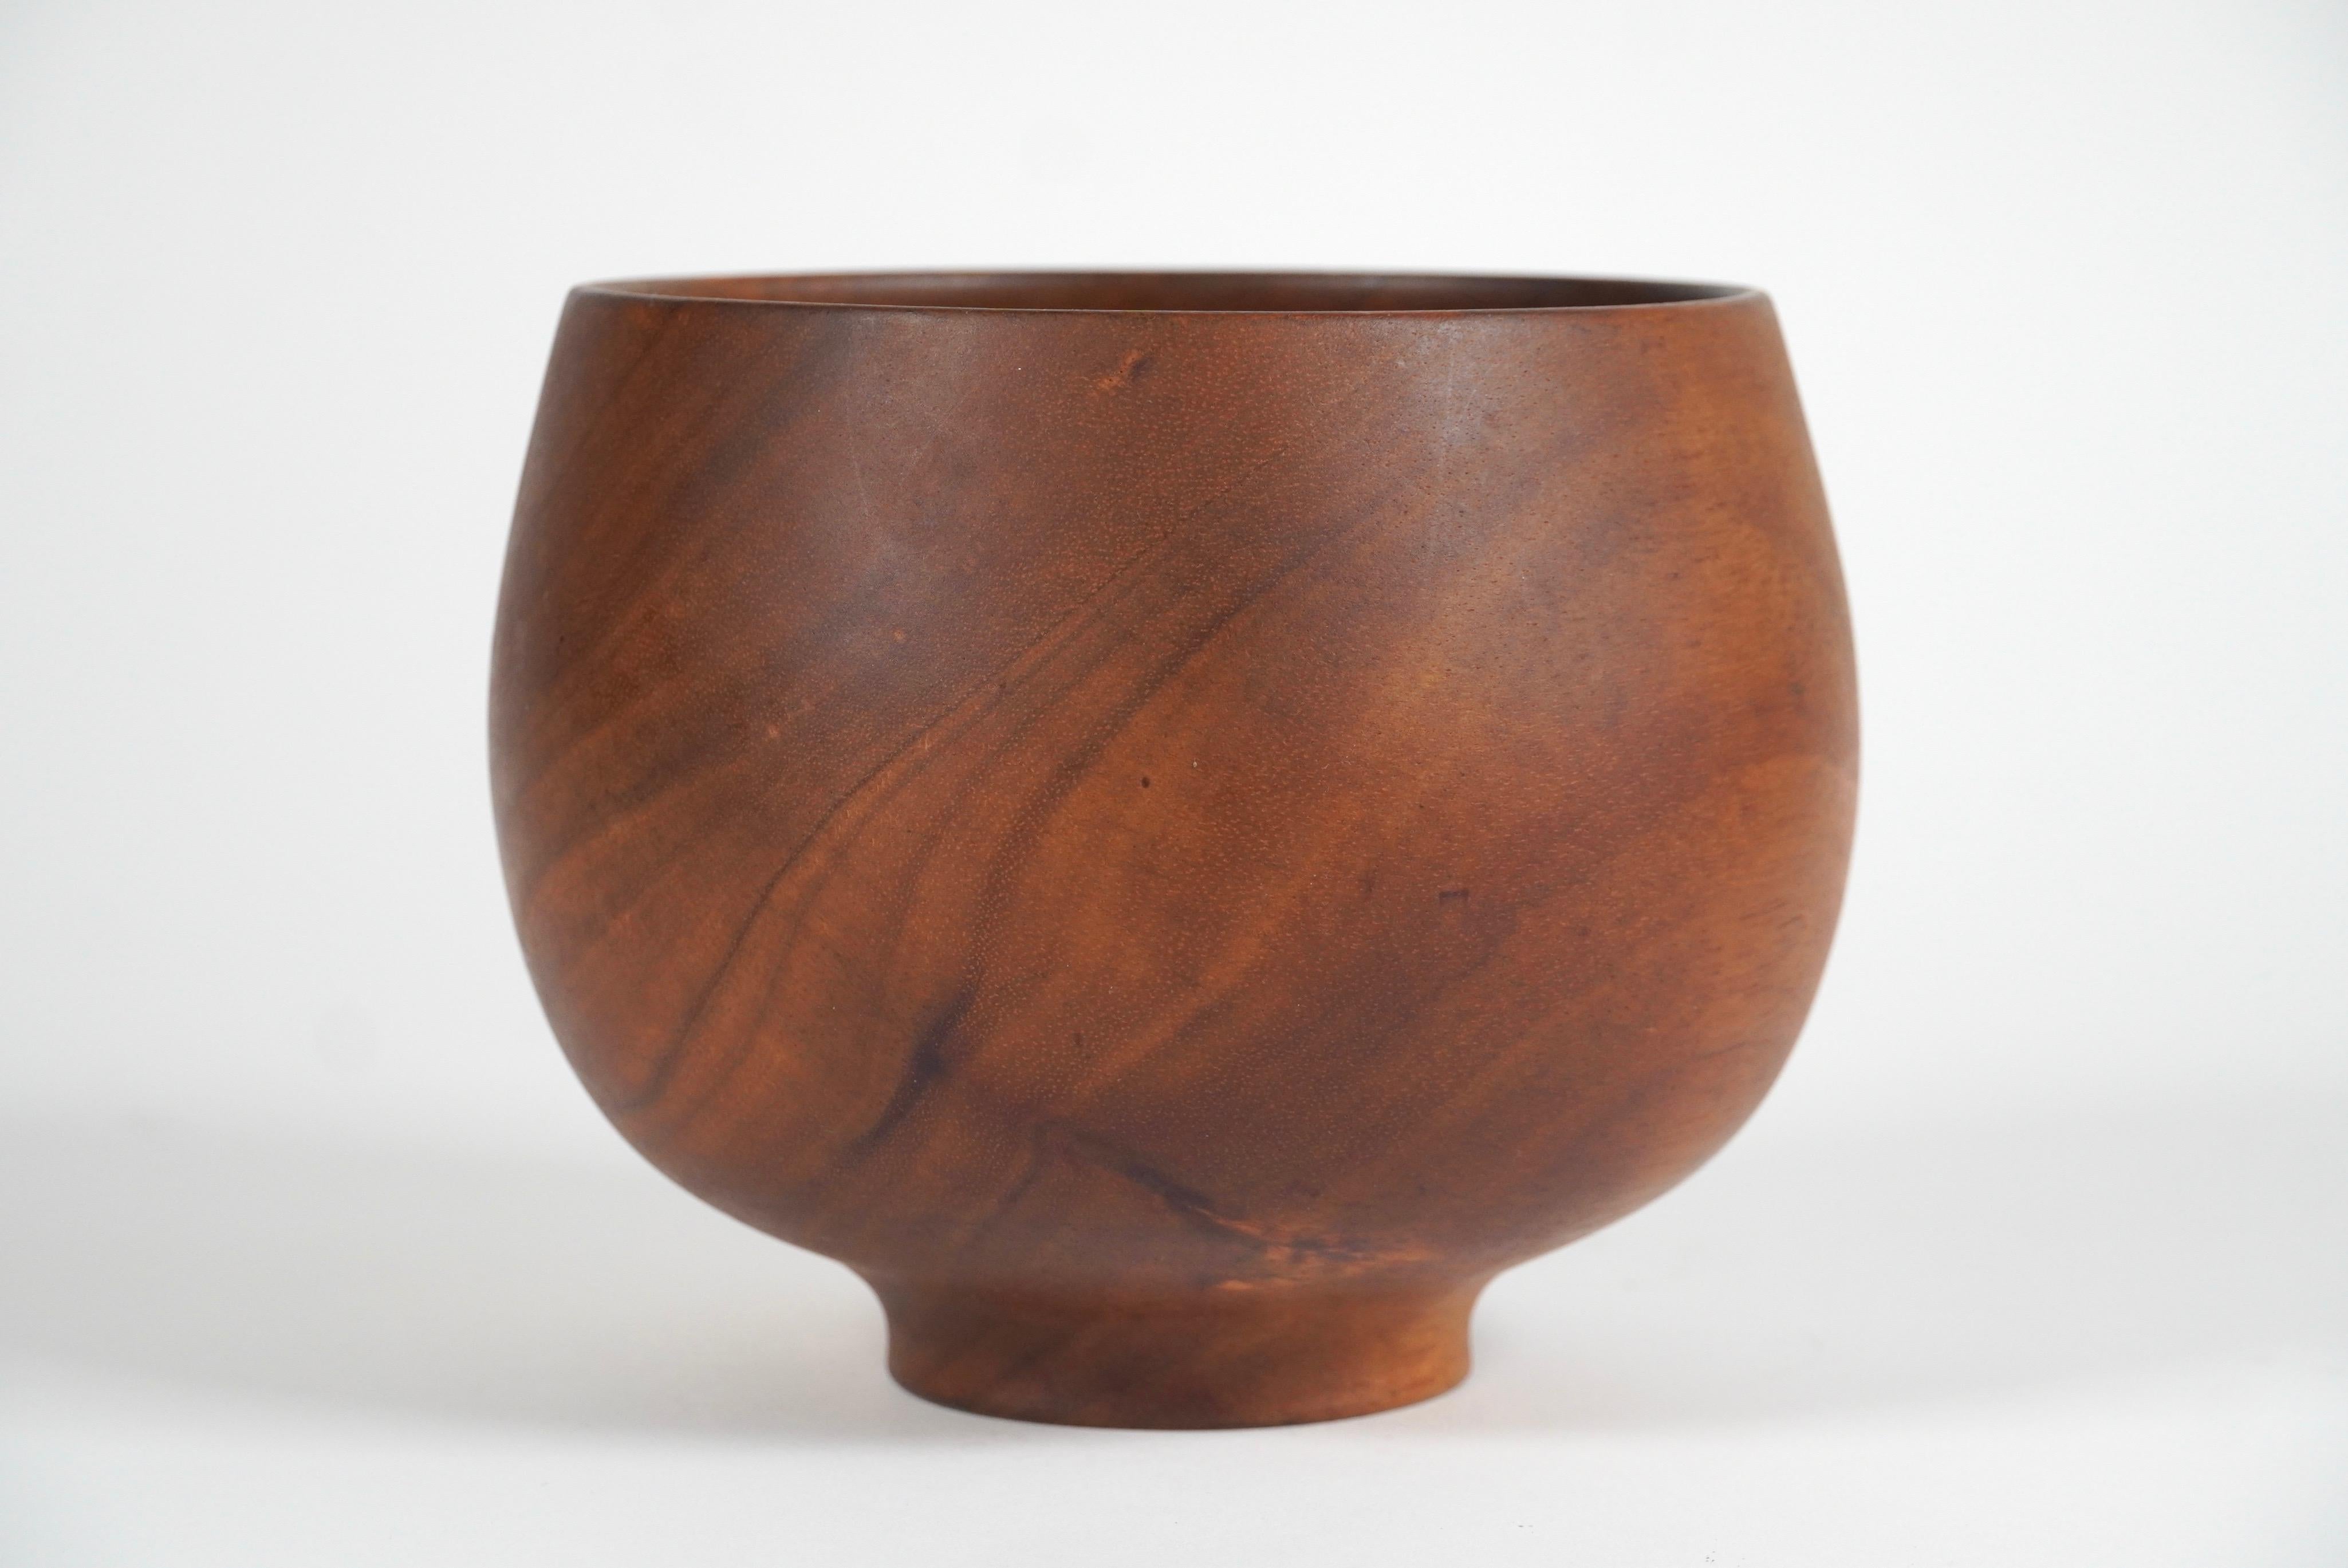 Calabash Milo turned wood bowl by craftsman Jack Straka (1934-) of Hawai'i. A footed form with a bulbous bottom curving into a thin walled tapered bowl, beautiful graining with dark and golden hues across the bowl. Marked with ink stamp on the